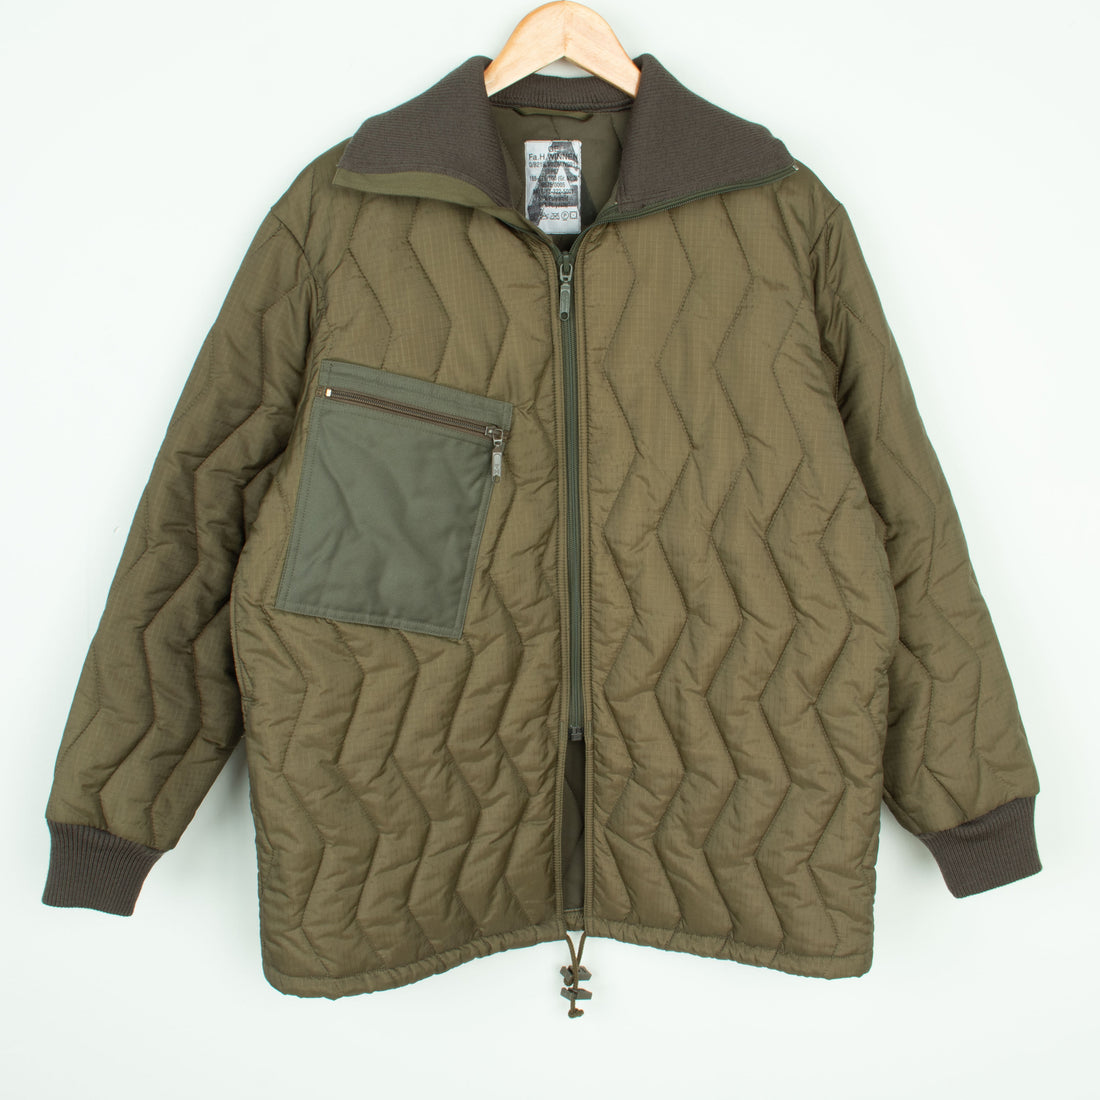 German Army Quilted Field Jacket